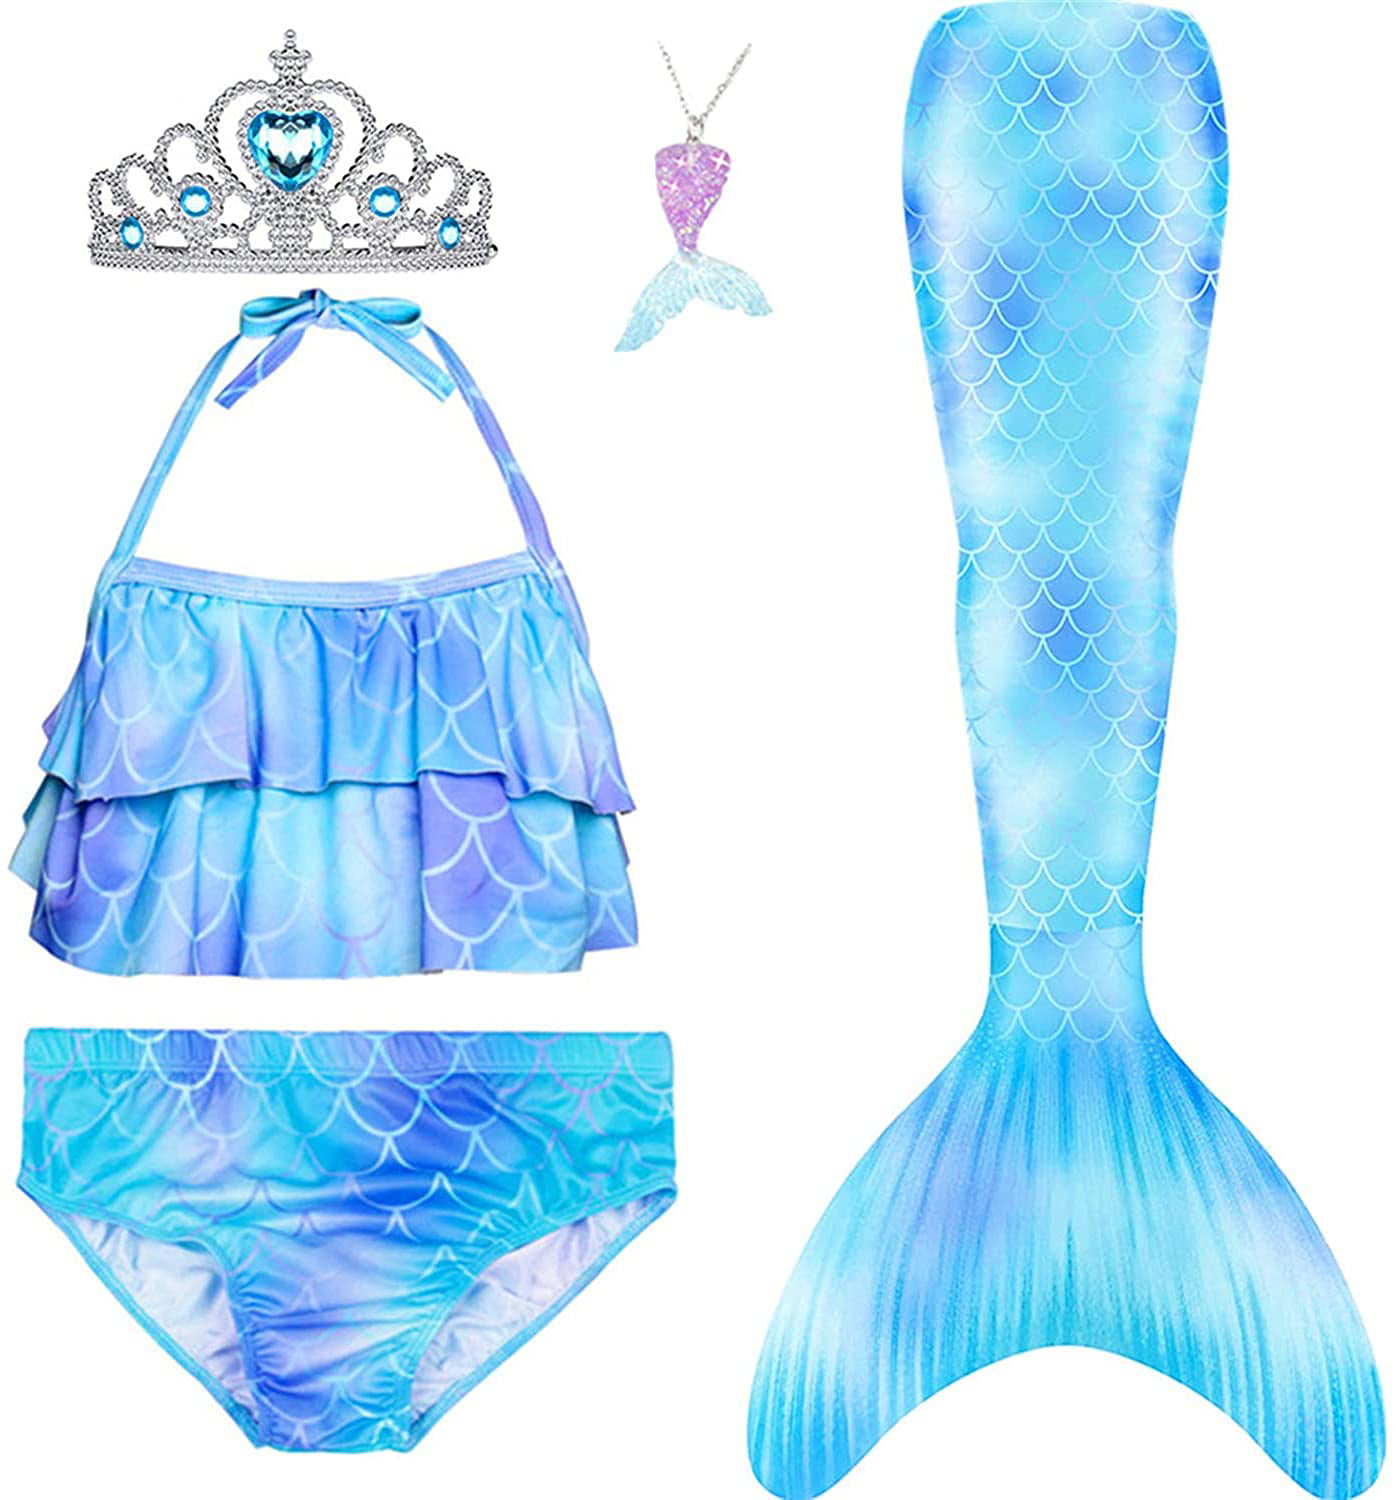 Mermaid Tails for Swimming for Girls Princess Bikini Bathing Suit Set Swimmable Costume for Kids 3-12Y 5Pcs 